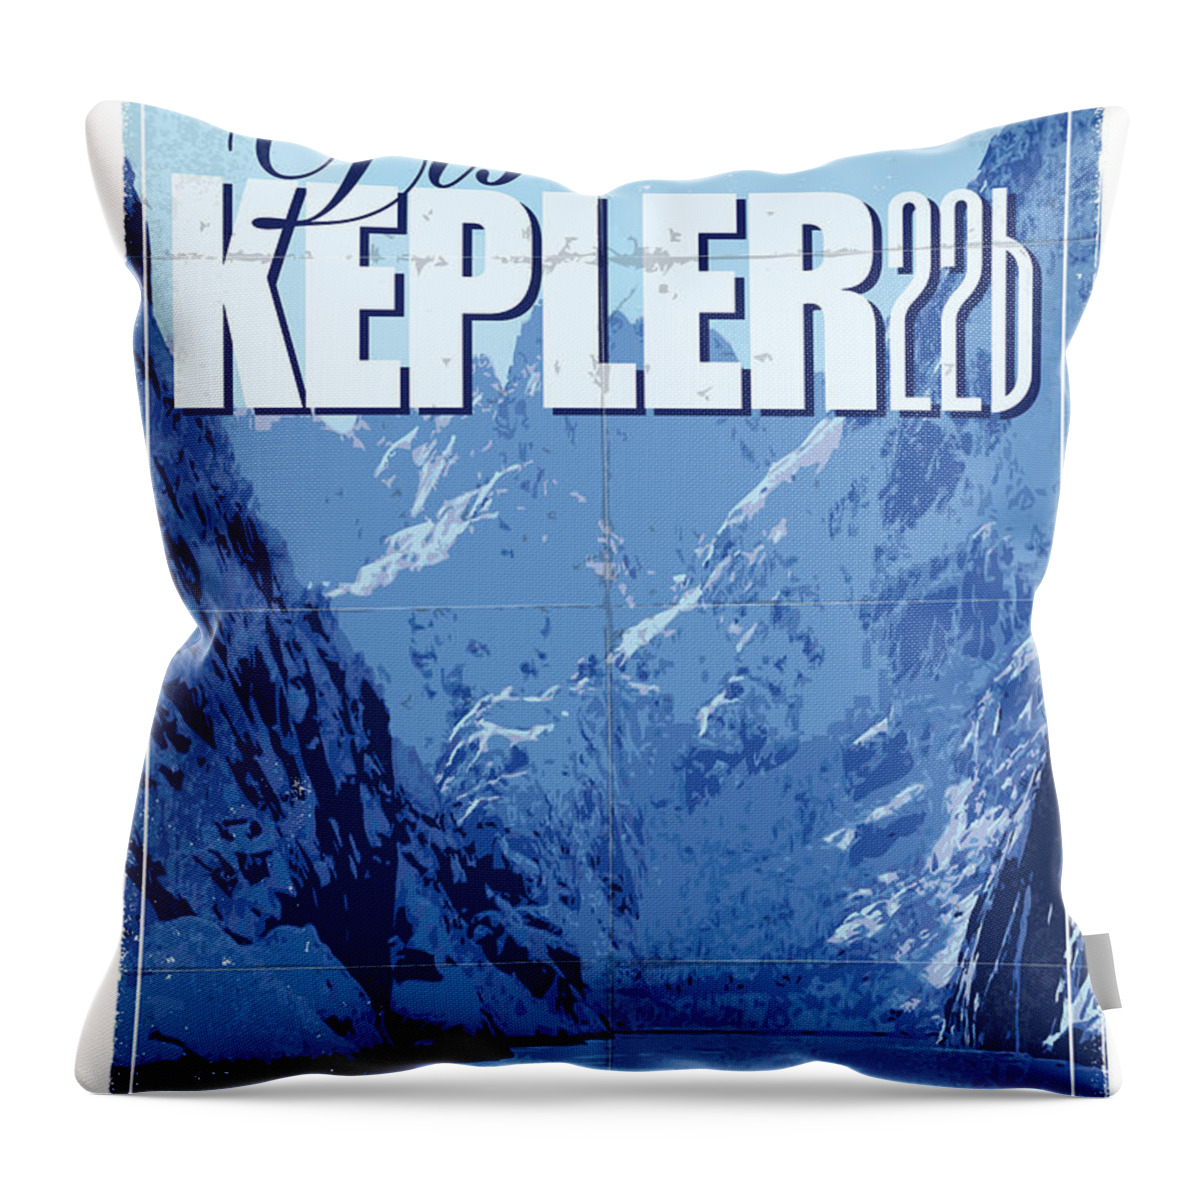 Space Throw Pillow featuring the digital art Exoplanet 02 Travel Poster KEPLER 22b by Chungkong Art